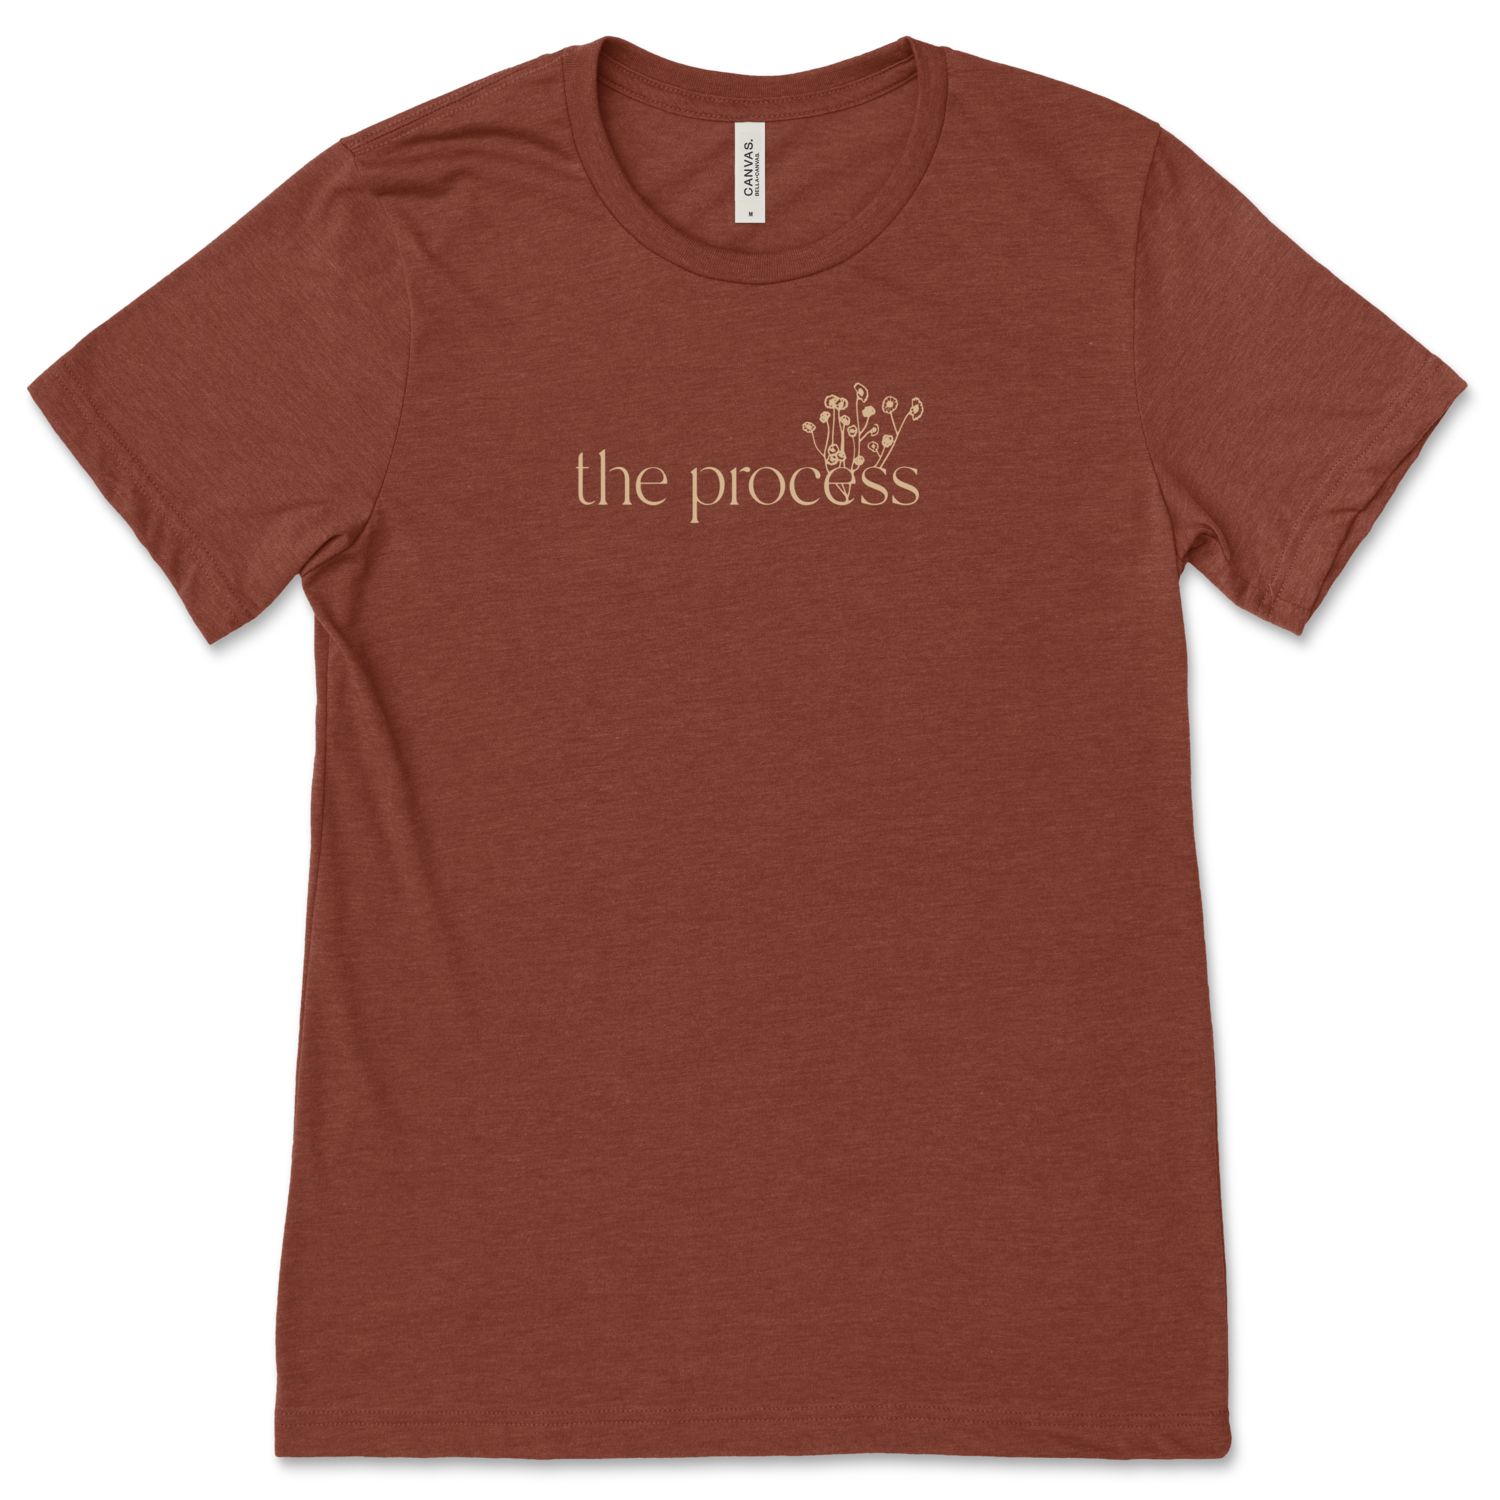 Heather Clay "The Process" Graphic Tee